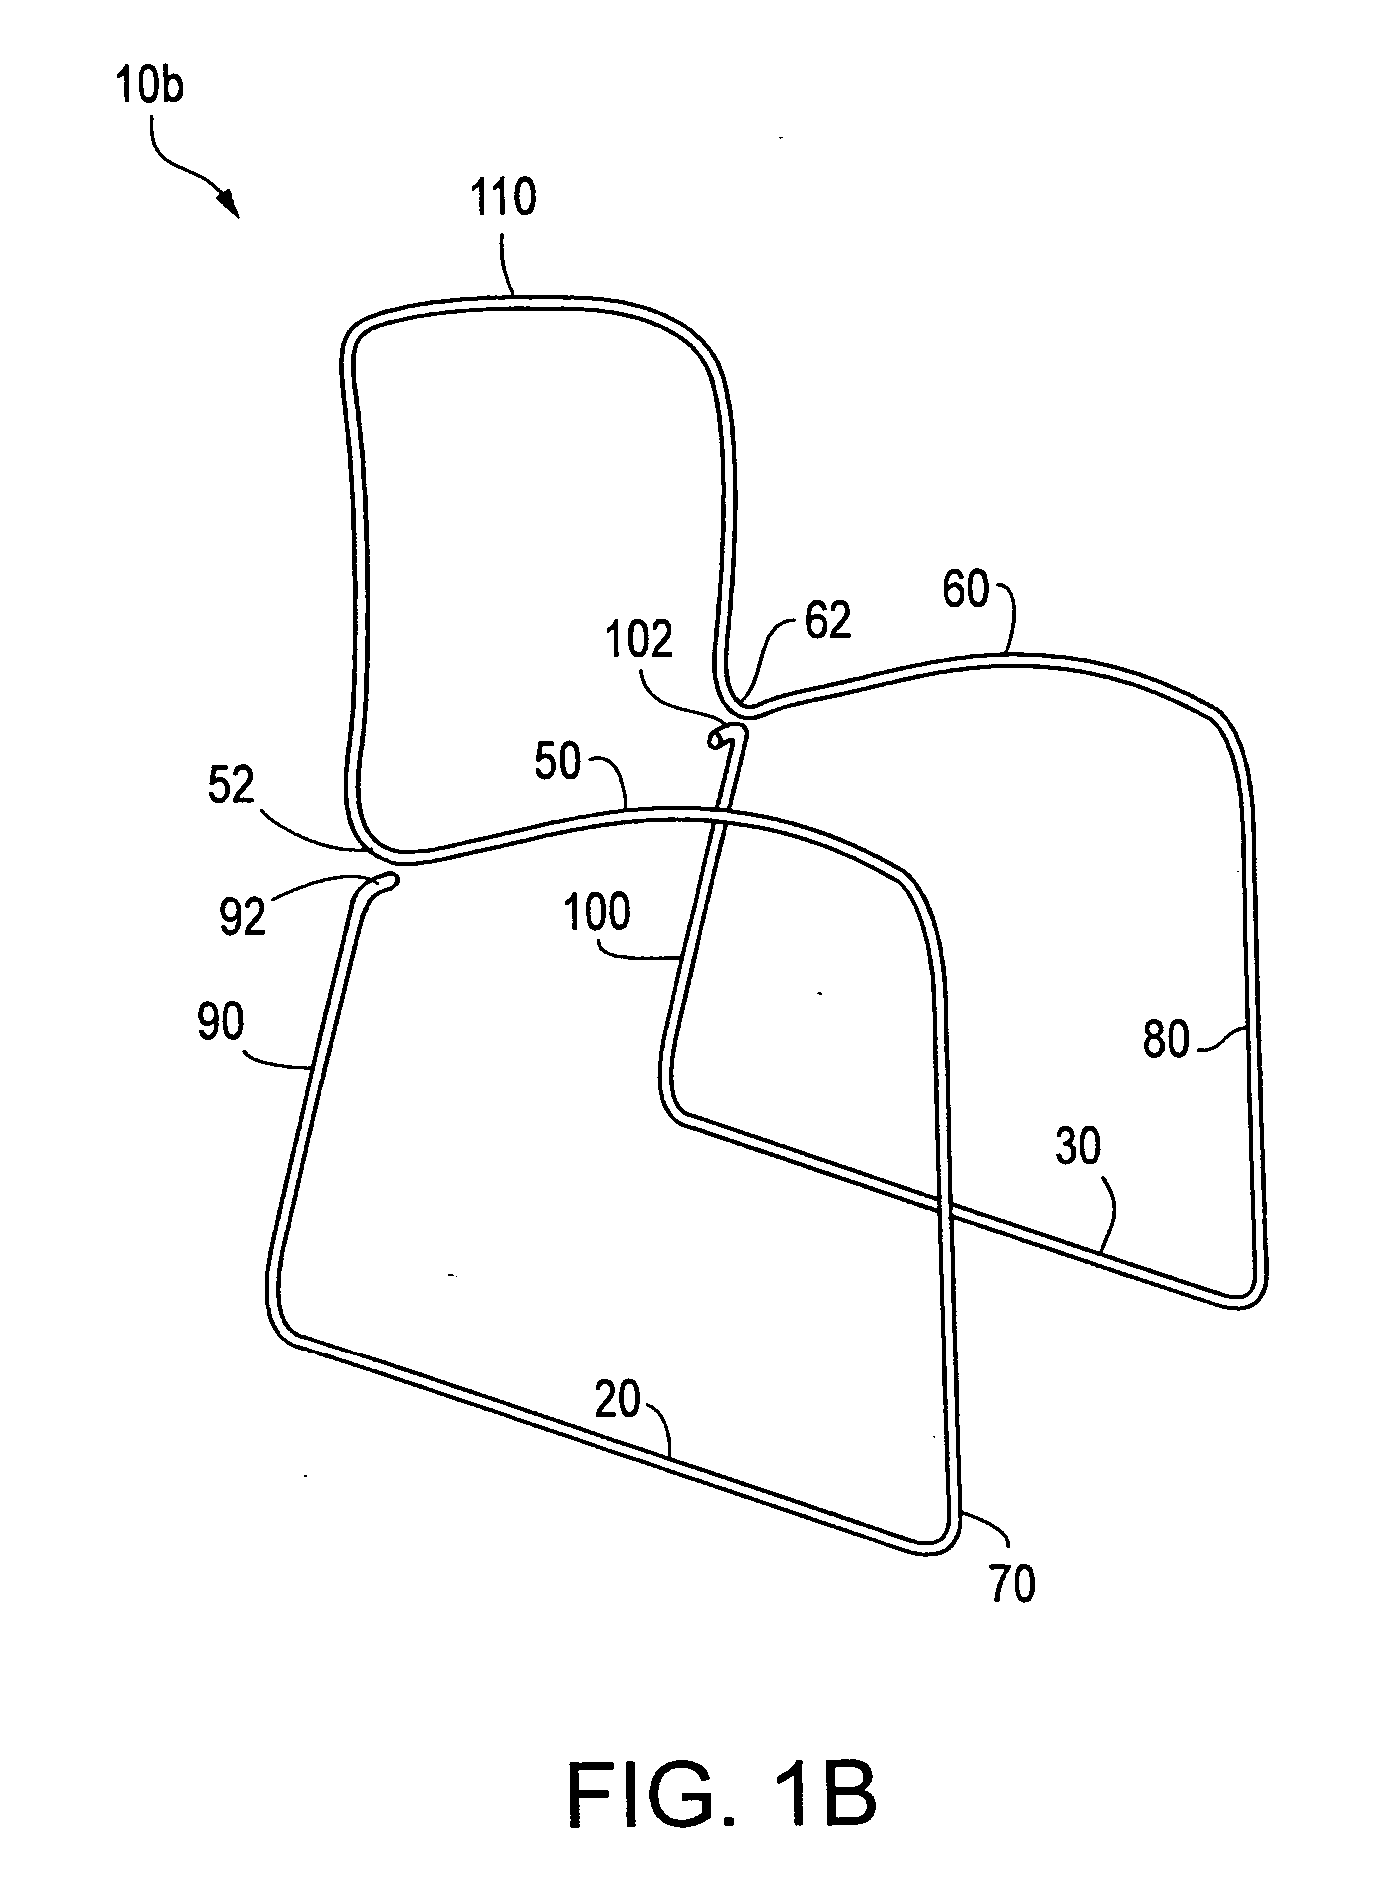 Method of forming a furniture article using heat-shrinkable material, and article formed therefrom